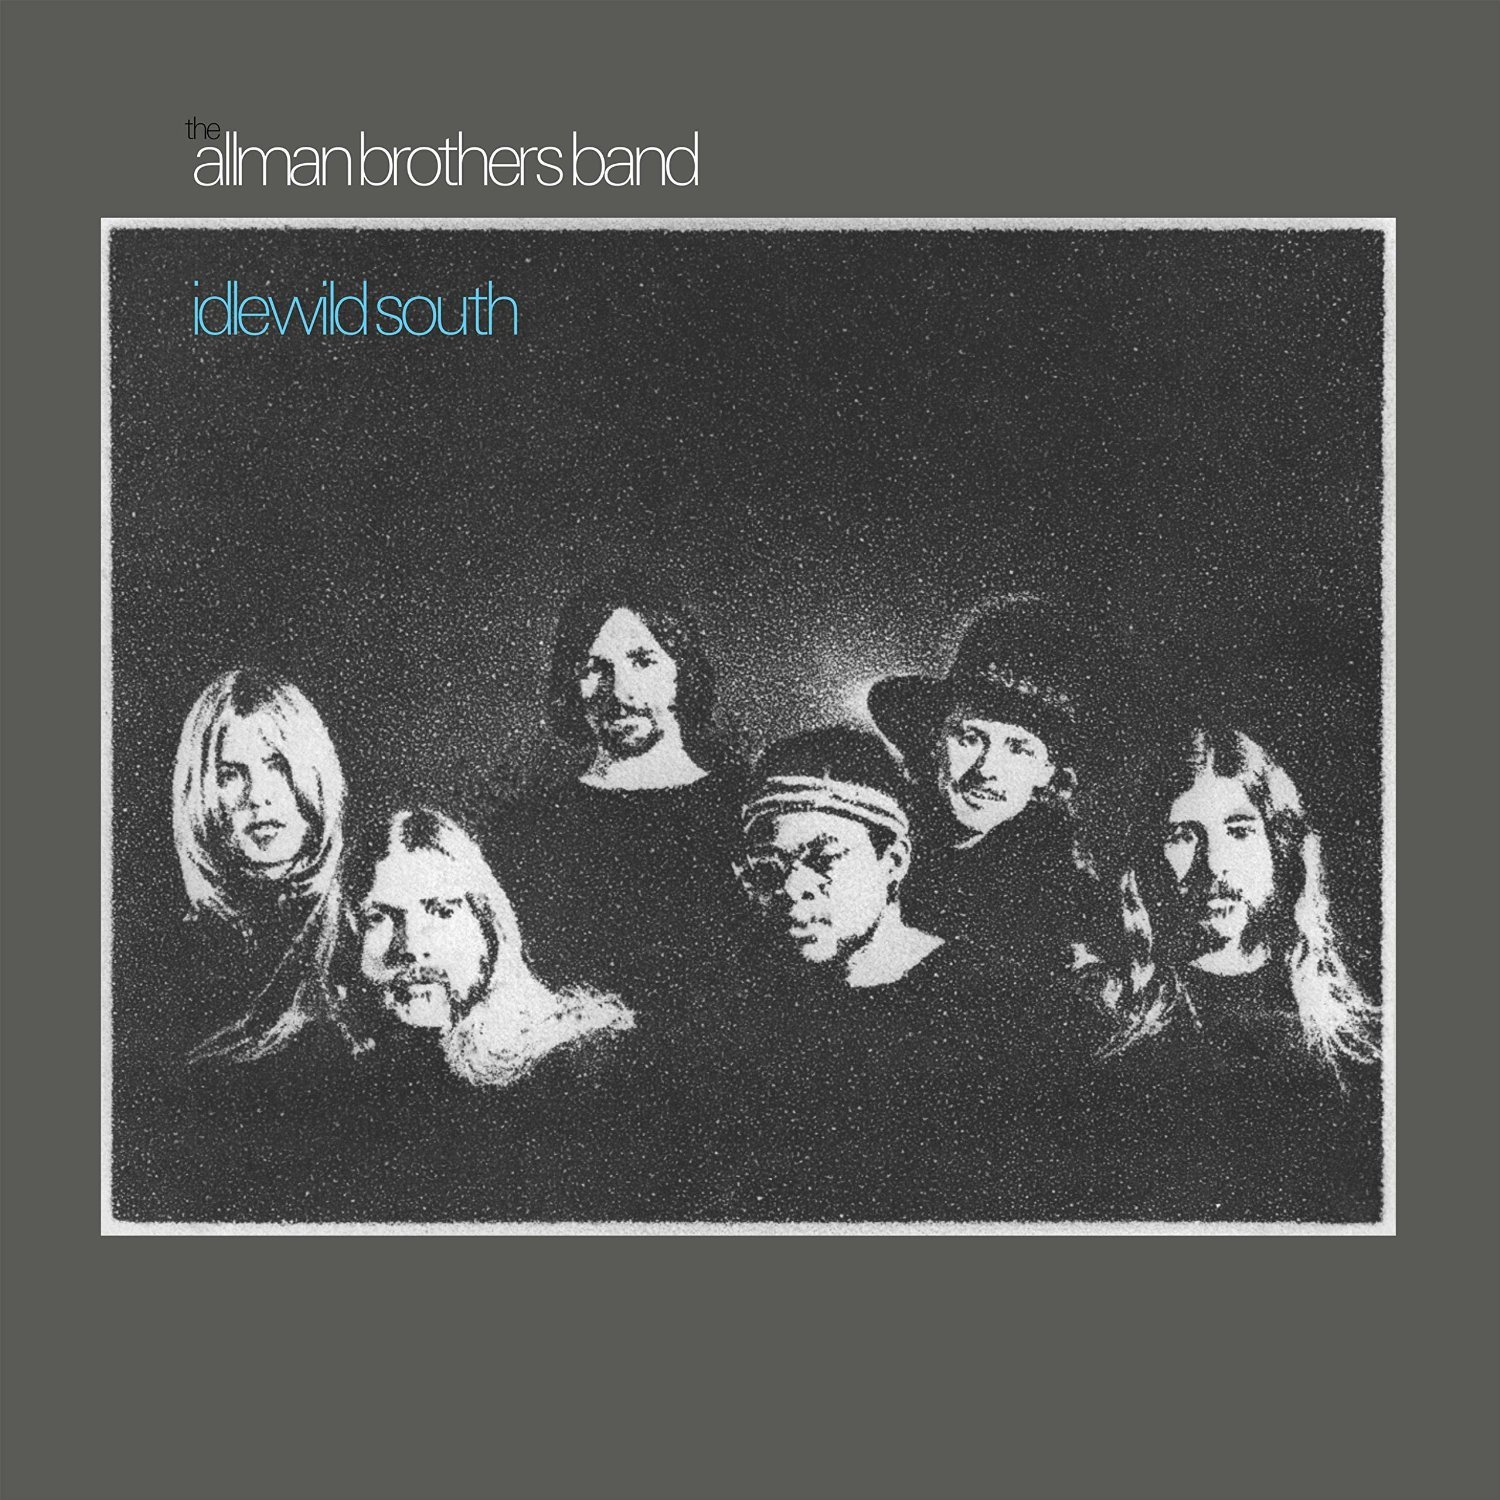 The Allman Brothers Band - Idlewild South (1970) {Deluxe Edition Remastered 2015} [HDTracks FLAC 24bit/96kHz]